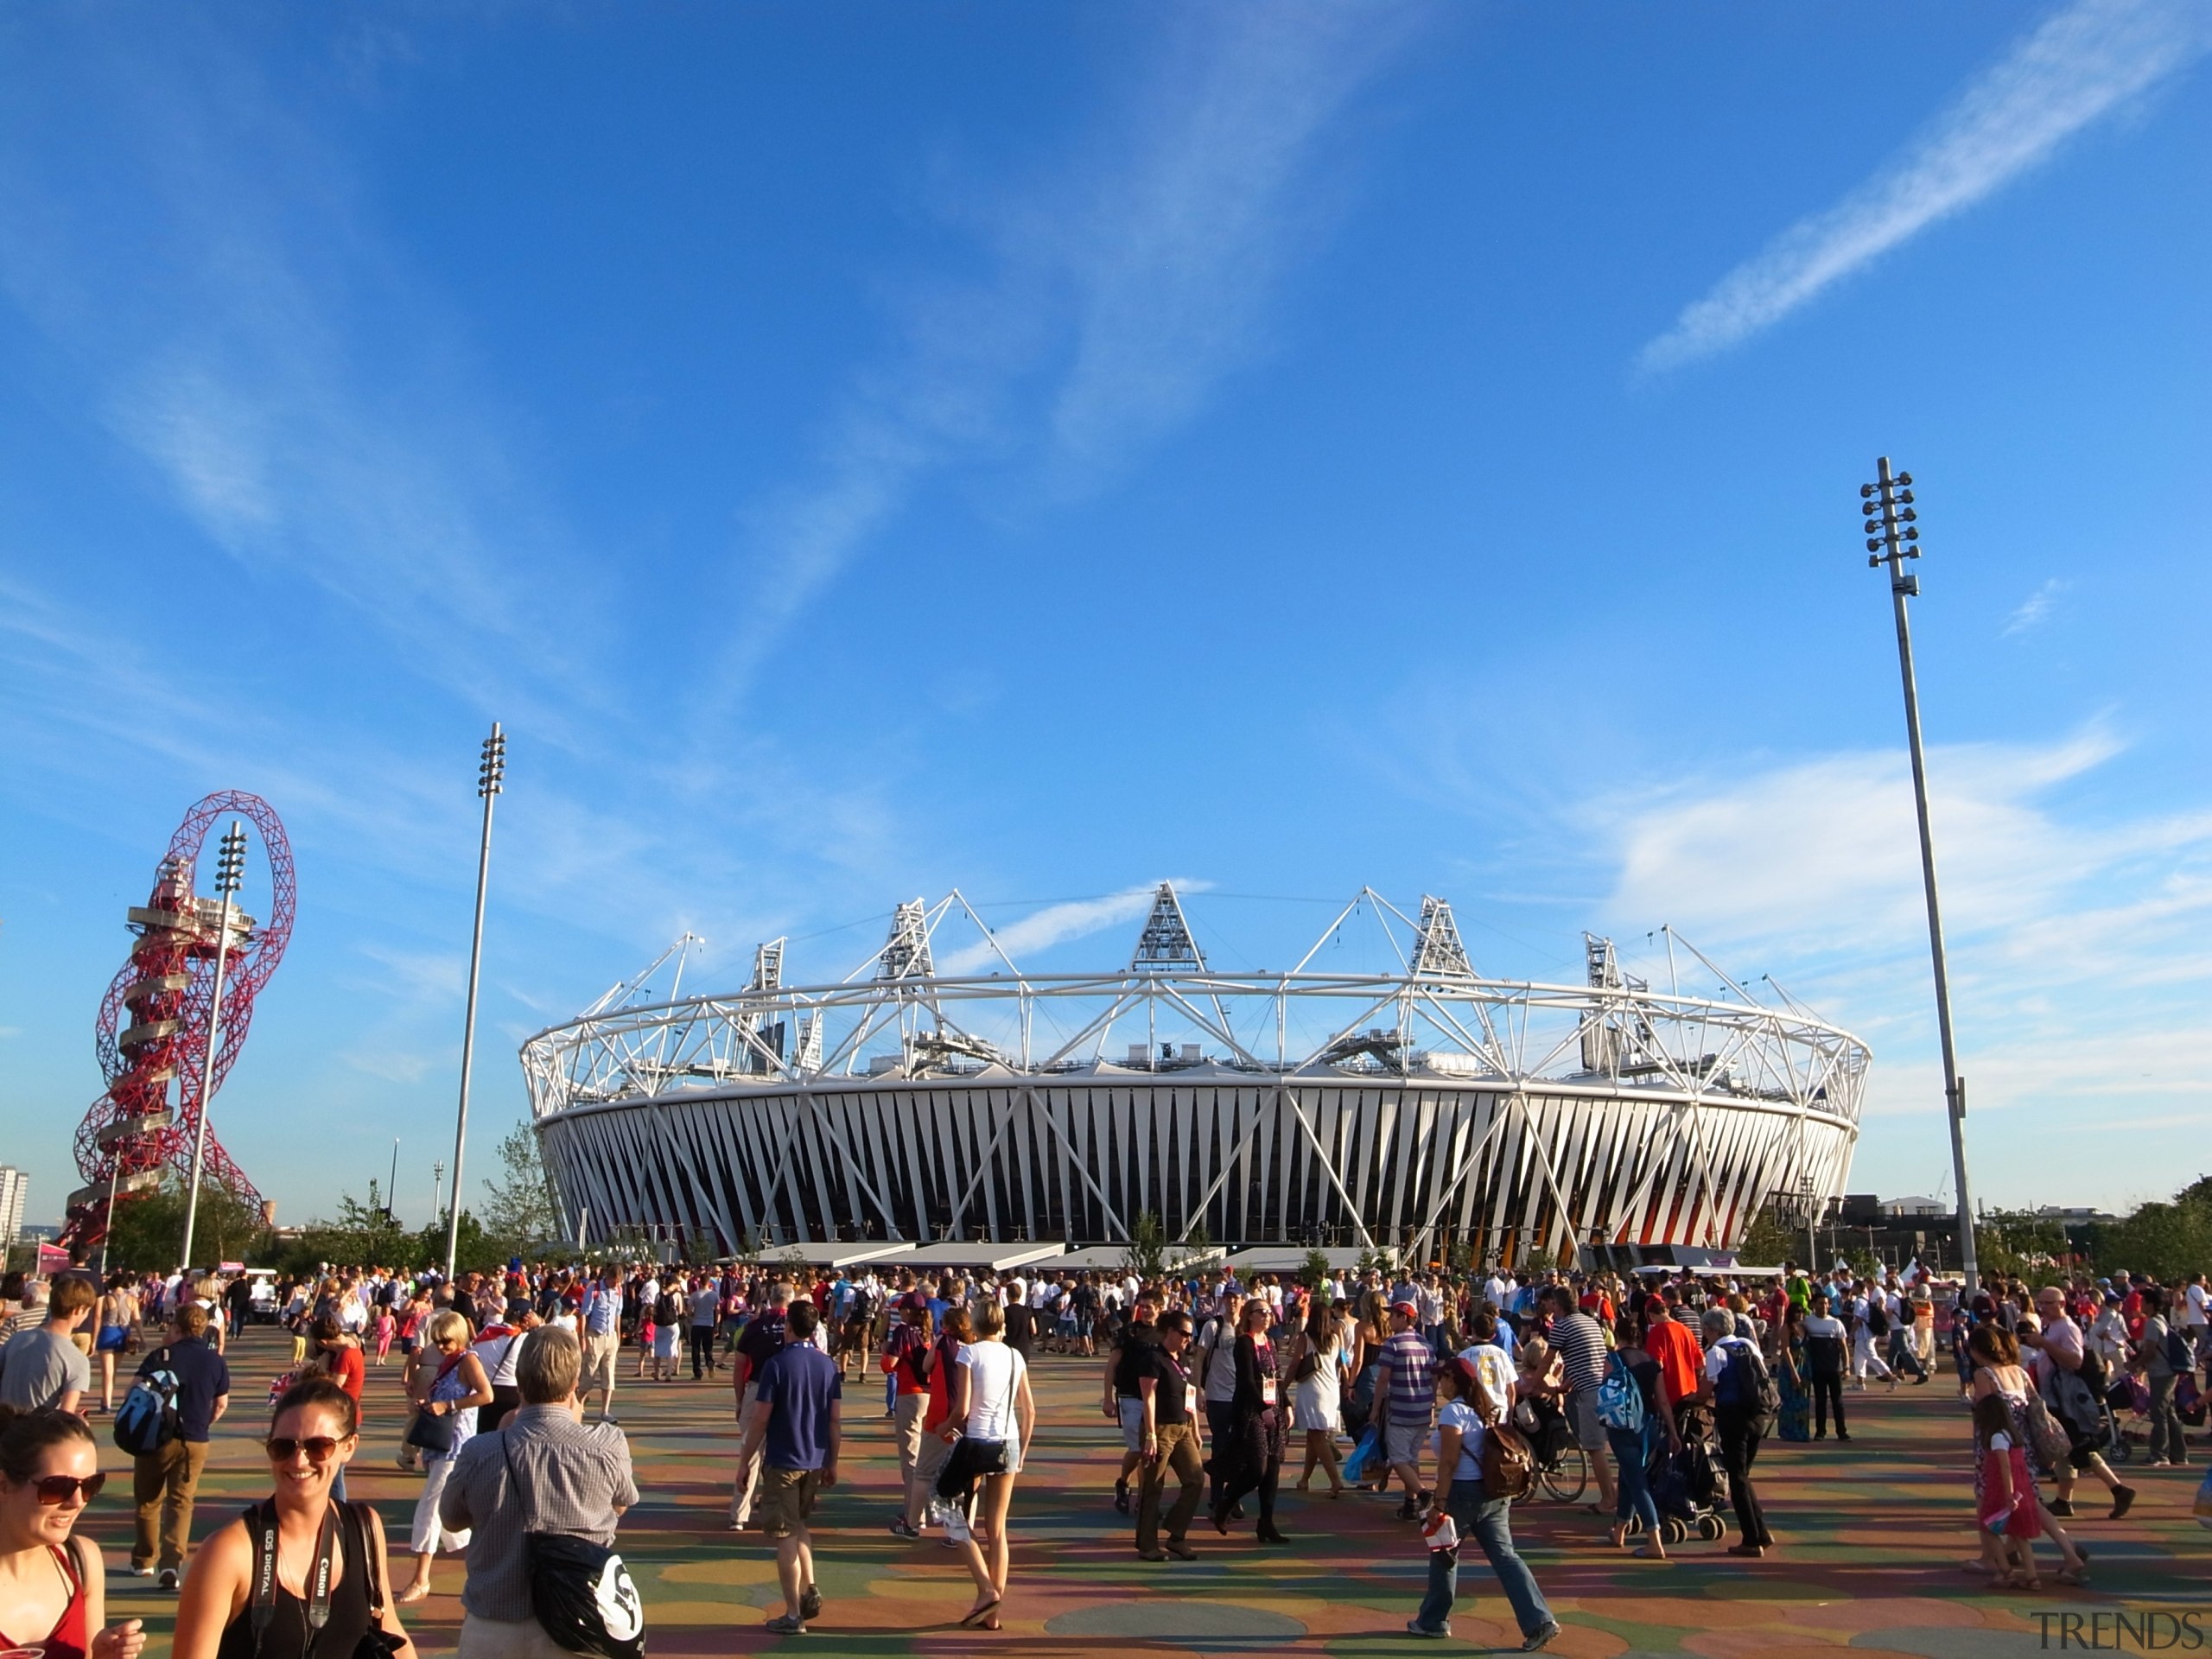 A report on contemporary stadia by architects Populous architecture, arena, crowd, event, fair, festival, fun, landmark, sky, sport venue, stadium, tourism, tourist attraction, teal